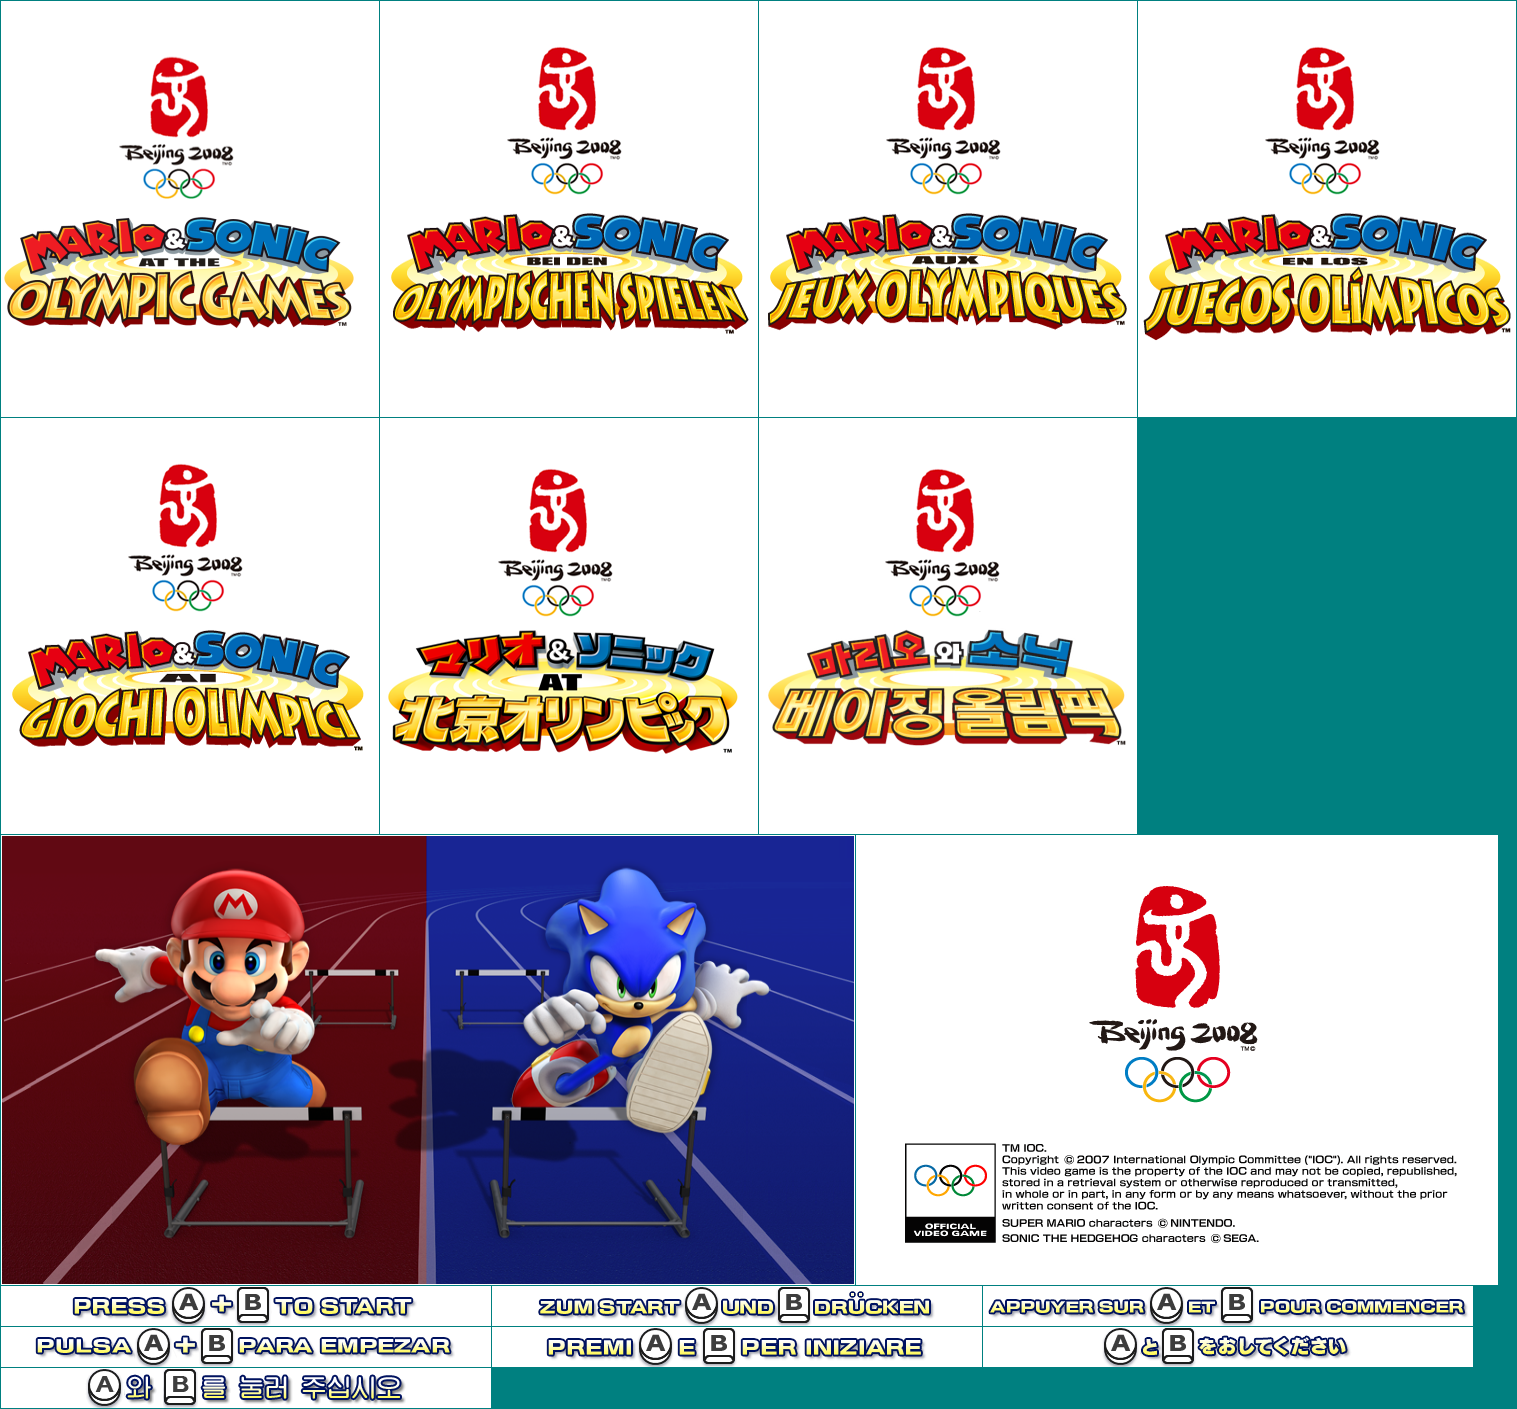 Mario & Sonic at the Olympic Games - Title Screen